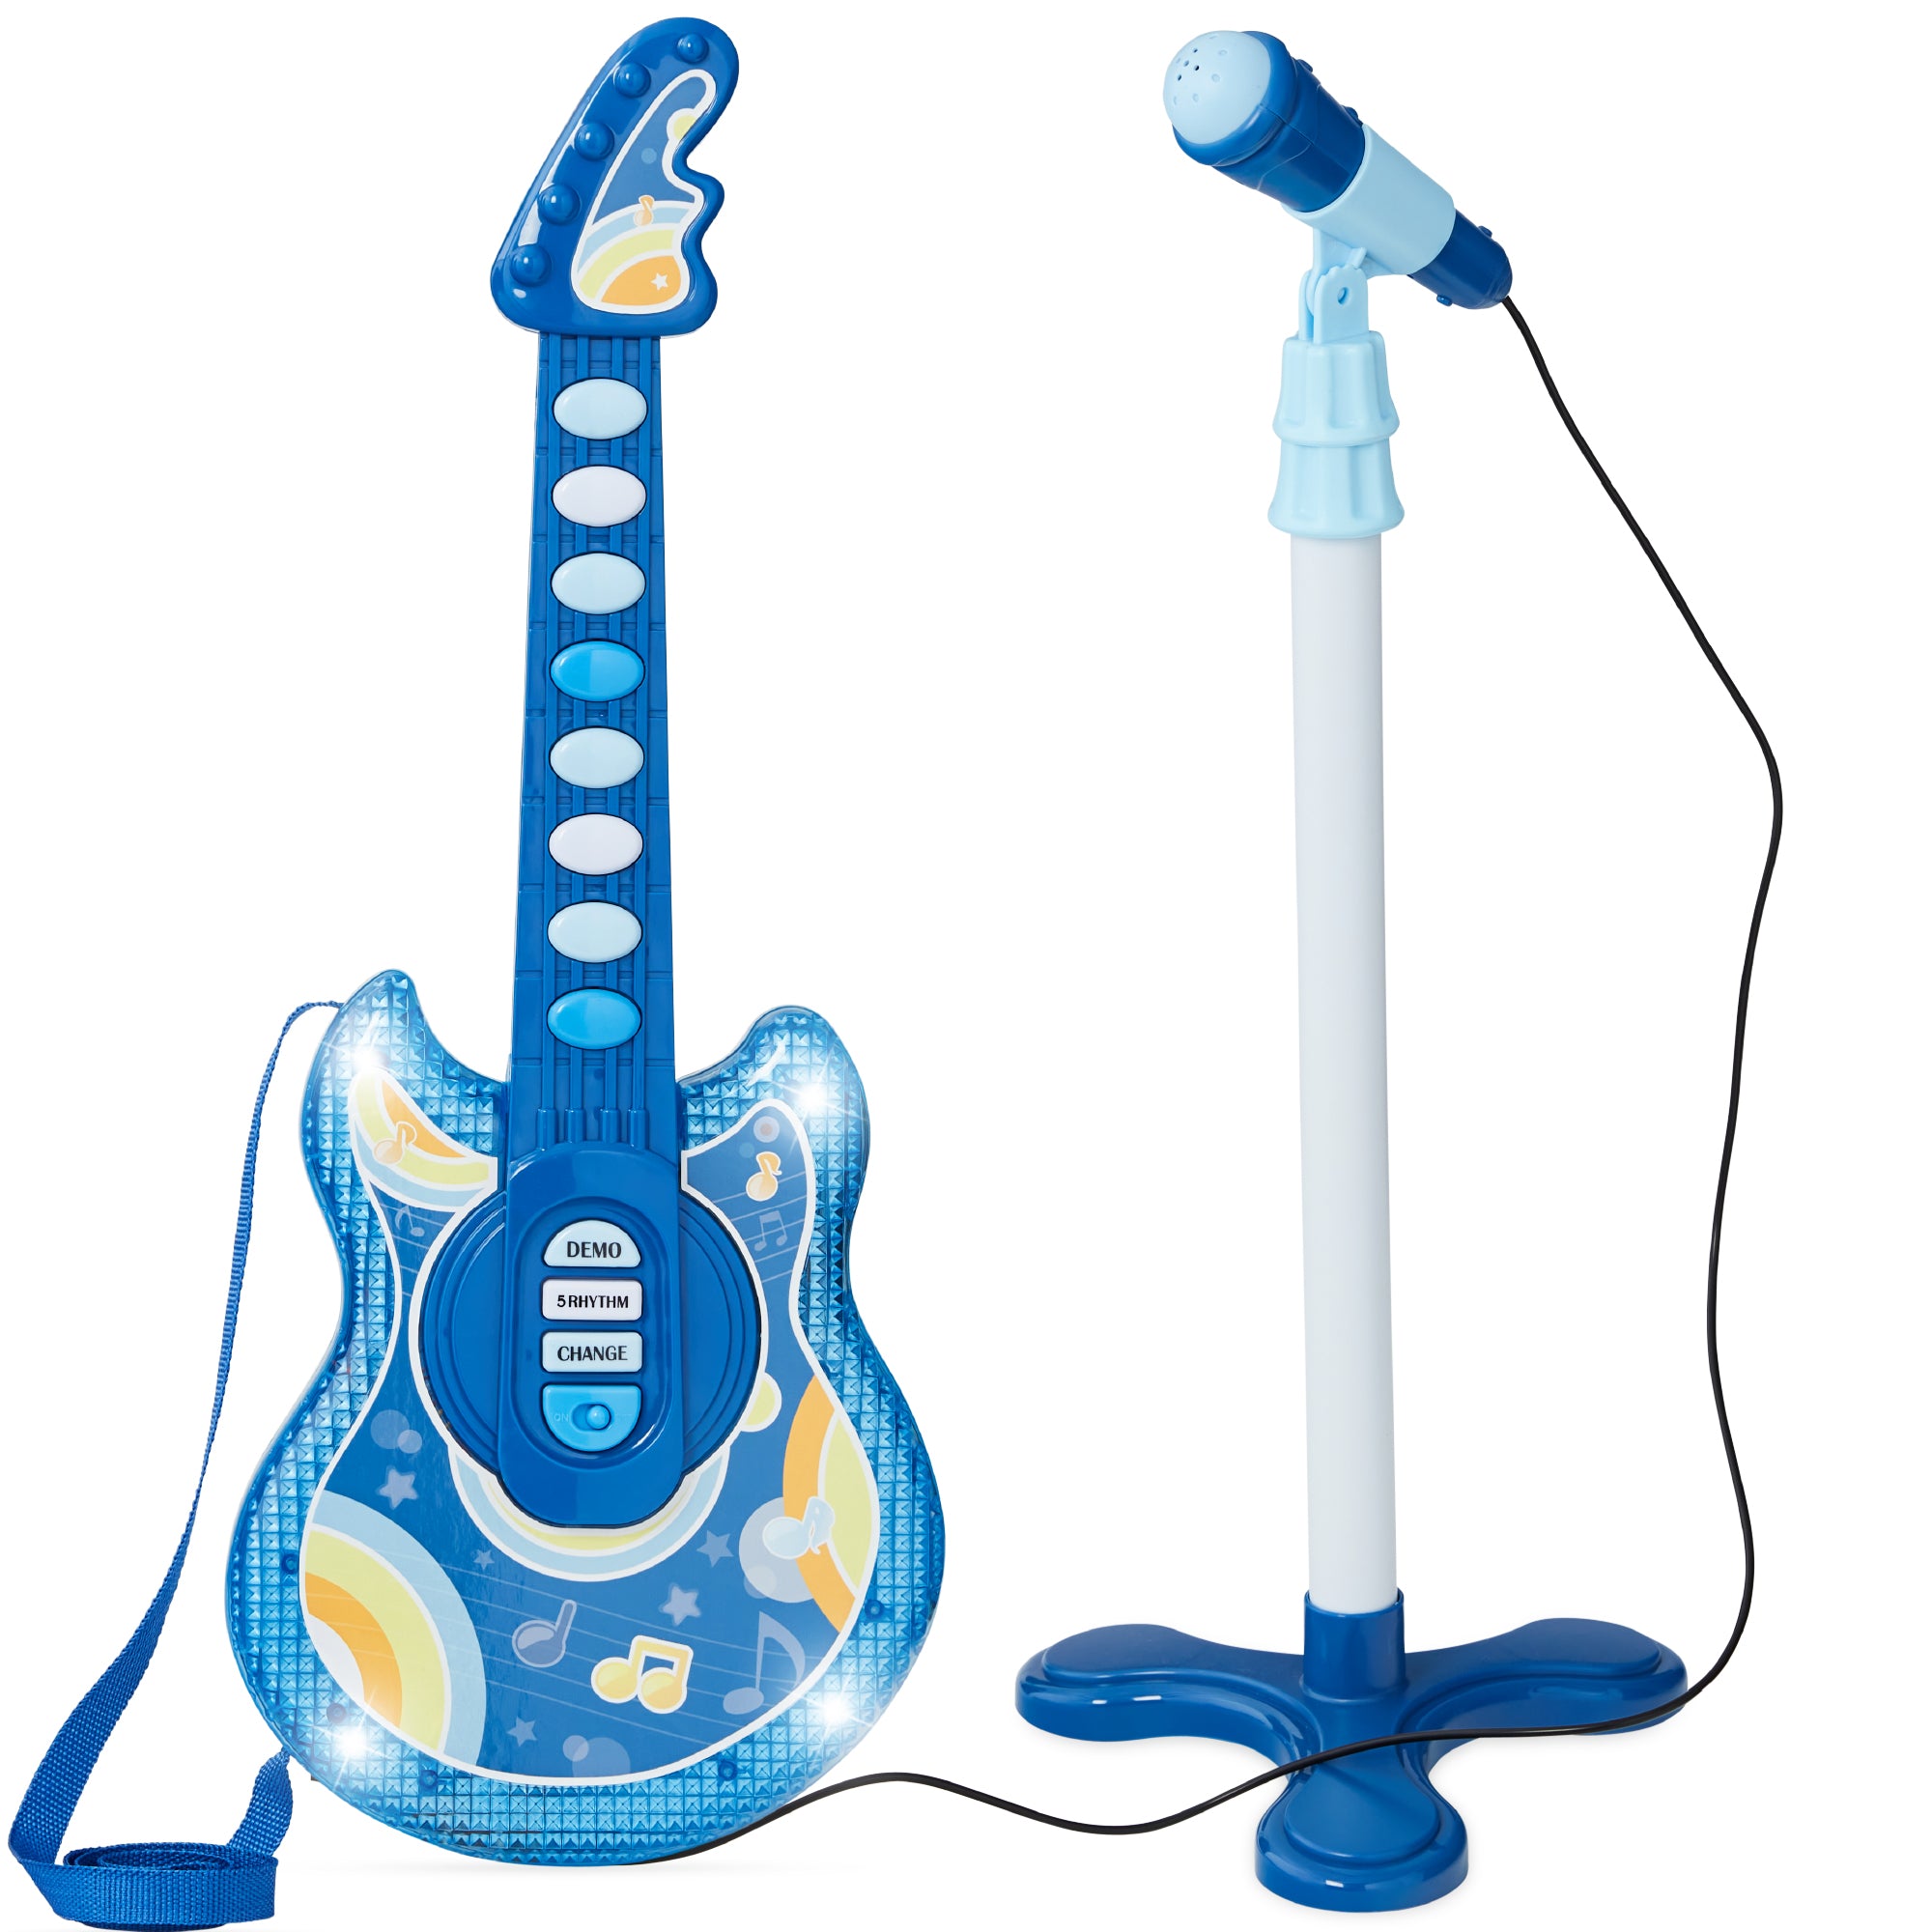 Kids Pretend Play Guitar Musical Instrument Toy w/ Microphone, Stand ...